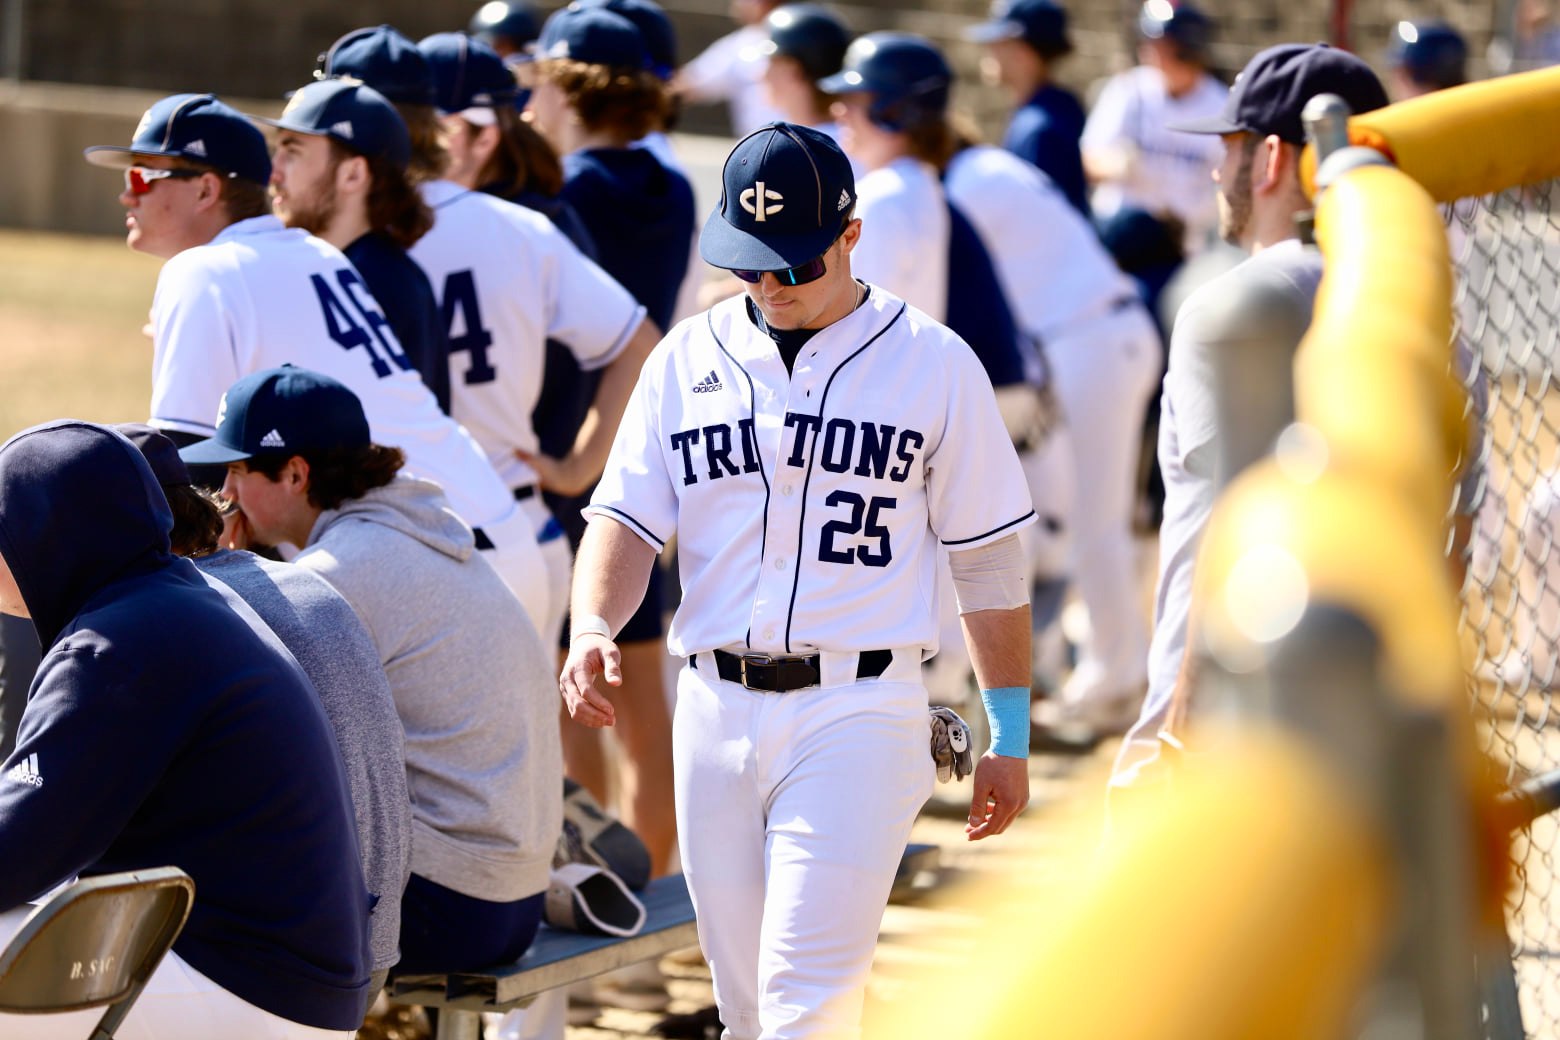 Tritons explode with 48 runs in sweep